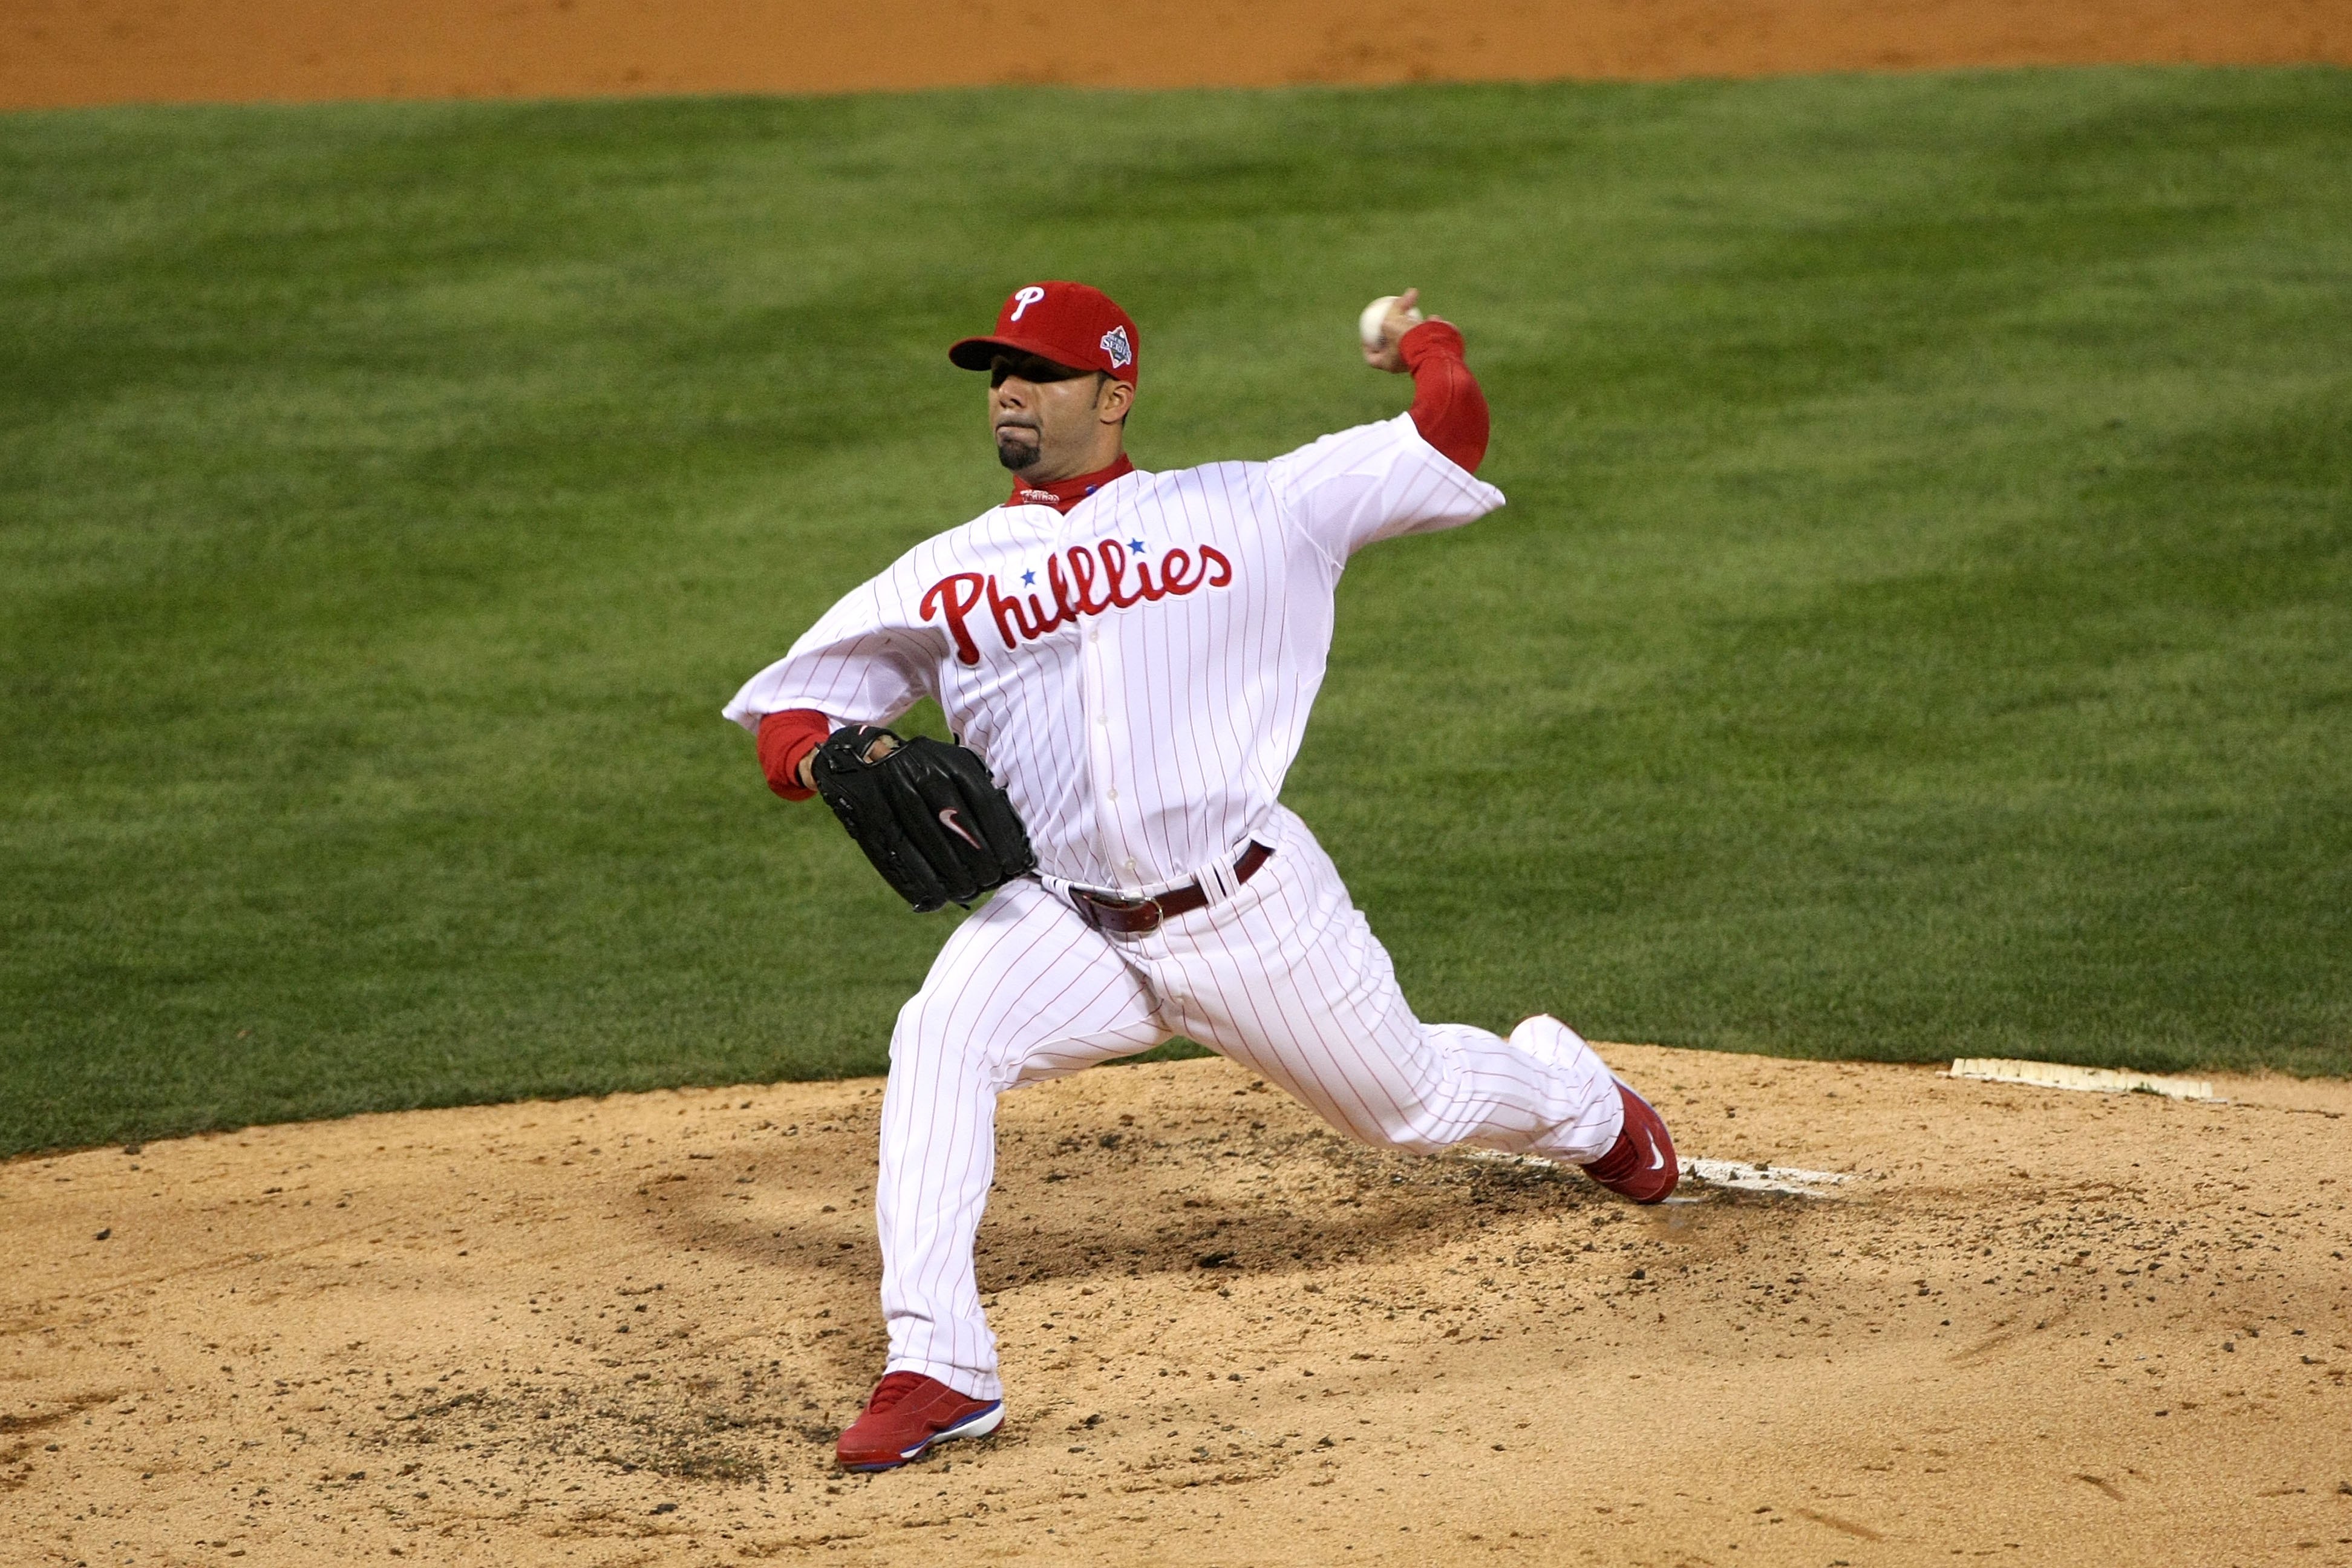 PHILADELPHIA - OCTOBER 29:  J.C. Romero #16 of the Philadelphia Phillies throws a pitch against the Tampa Bay Rays during the continuation of game five of the 2008 MLB World Series on October 29, 2008 at Citizens Bank Park in Philadelphia, Pennsylvania. T